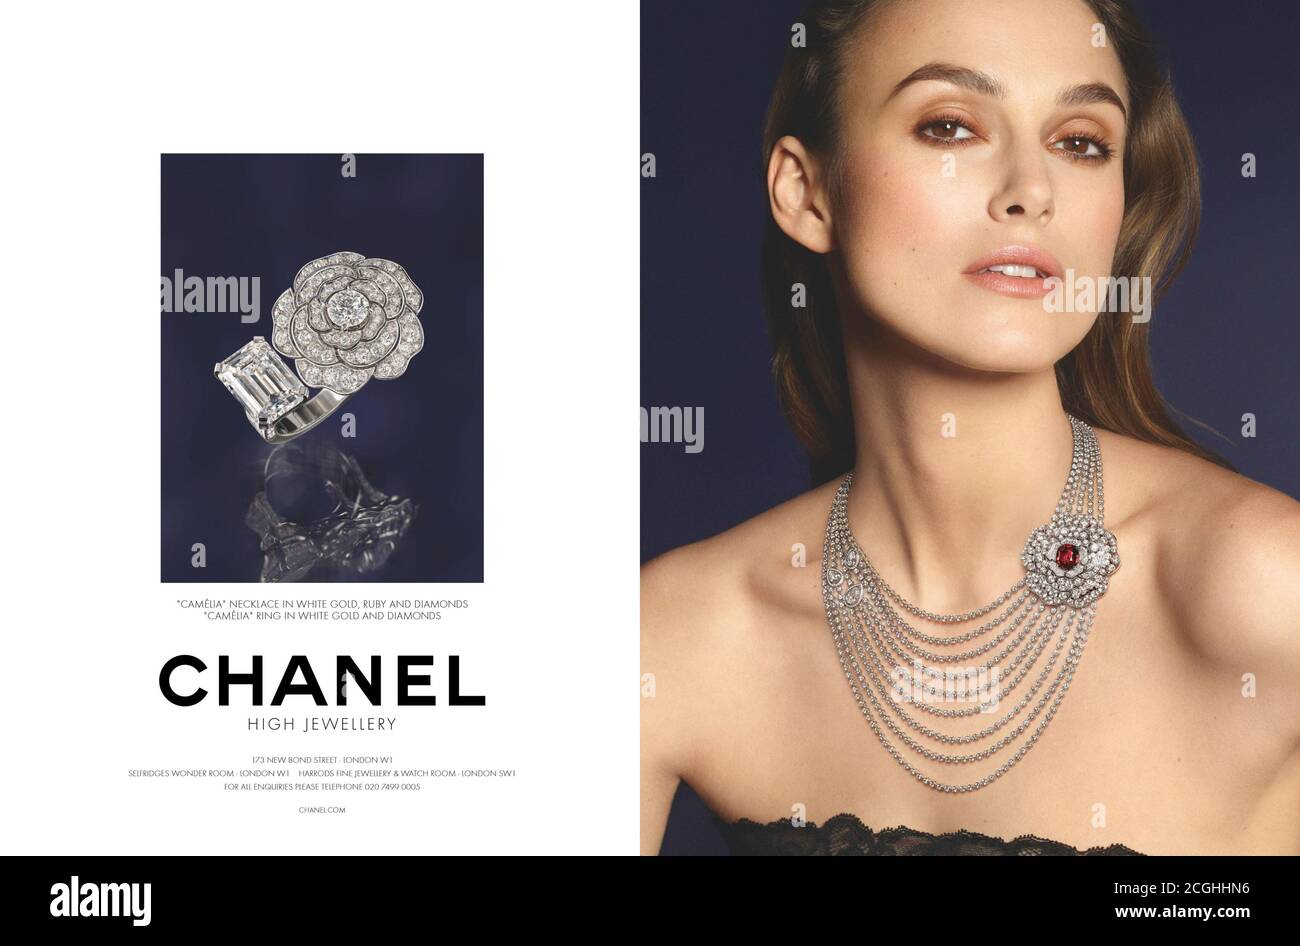 Introducing Chanels high jewellery collection  inspired by Venice